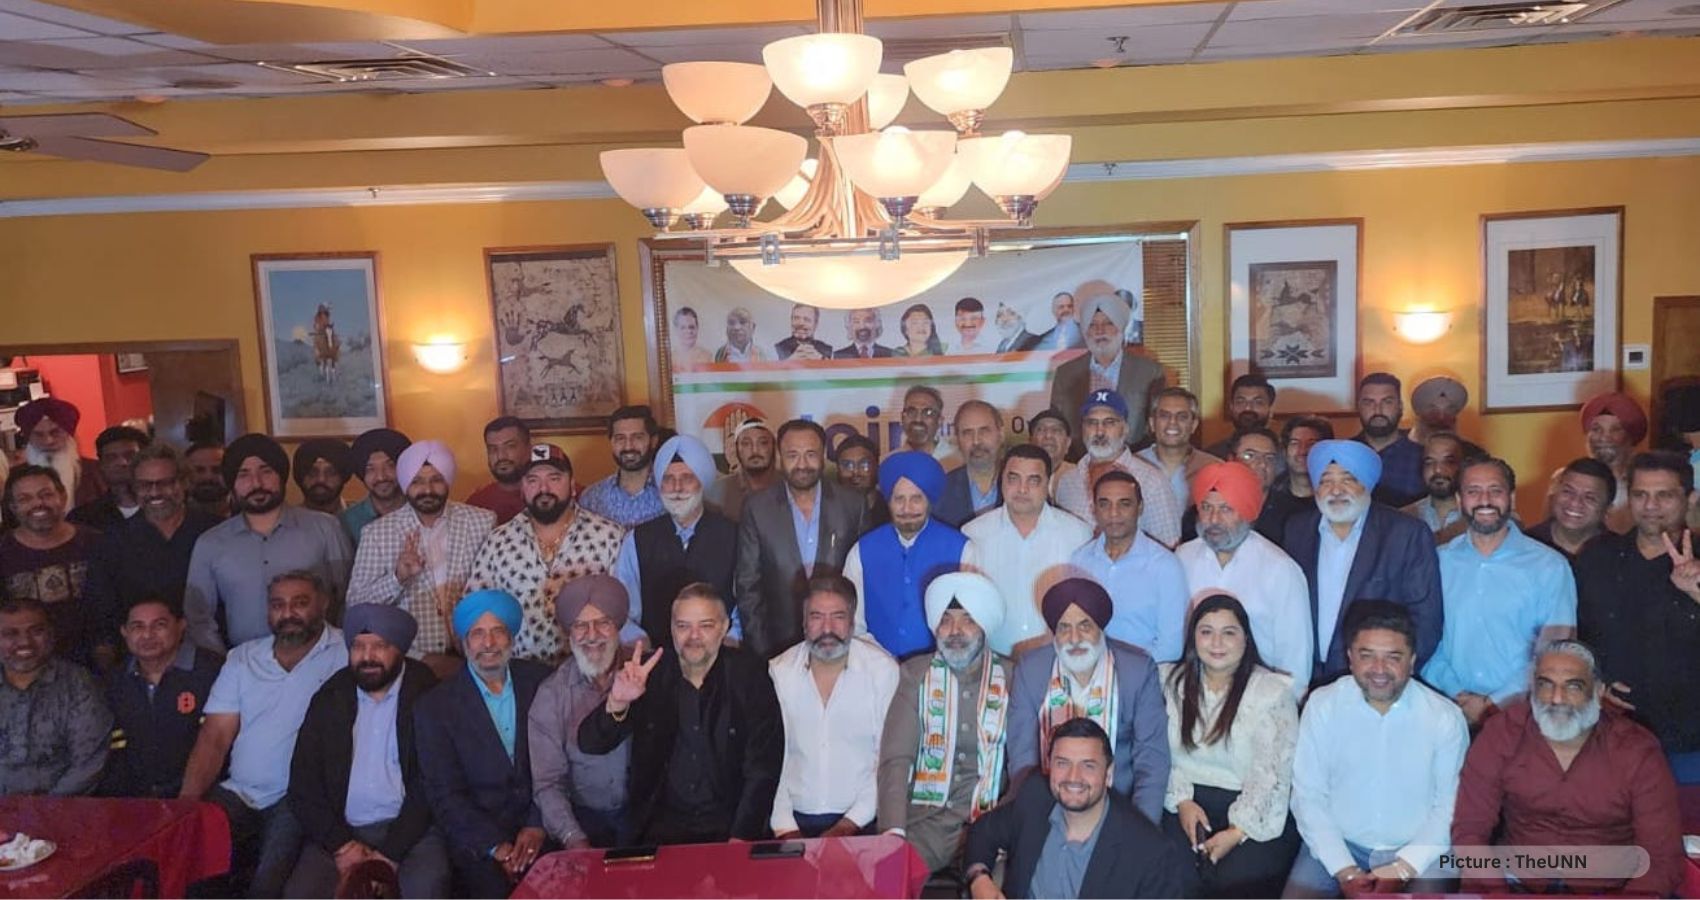 Gurdev Singh Hehar Appointed as President of IOCUSA’s Southwest Chapter